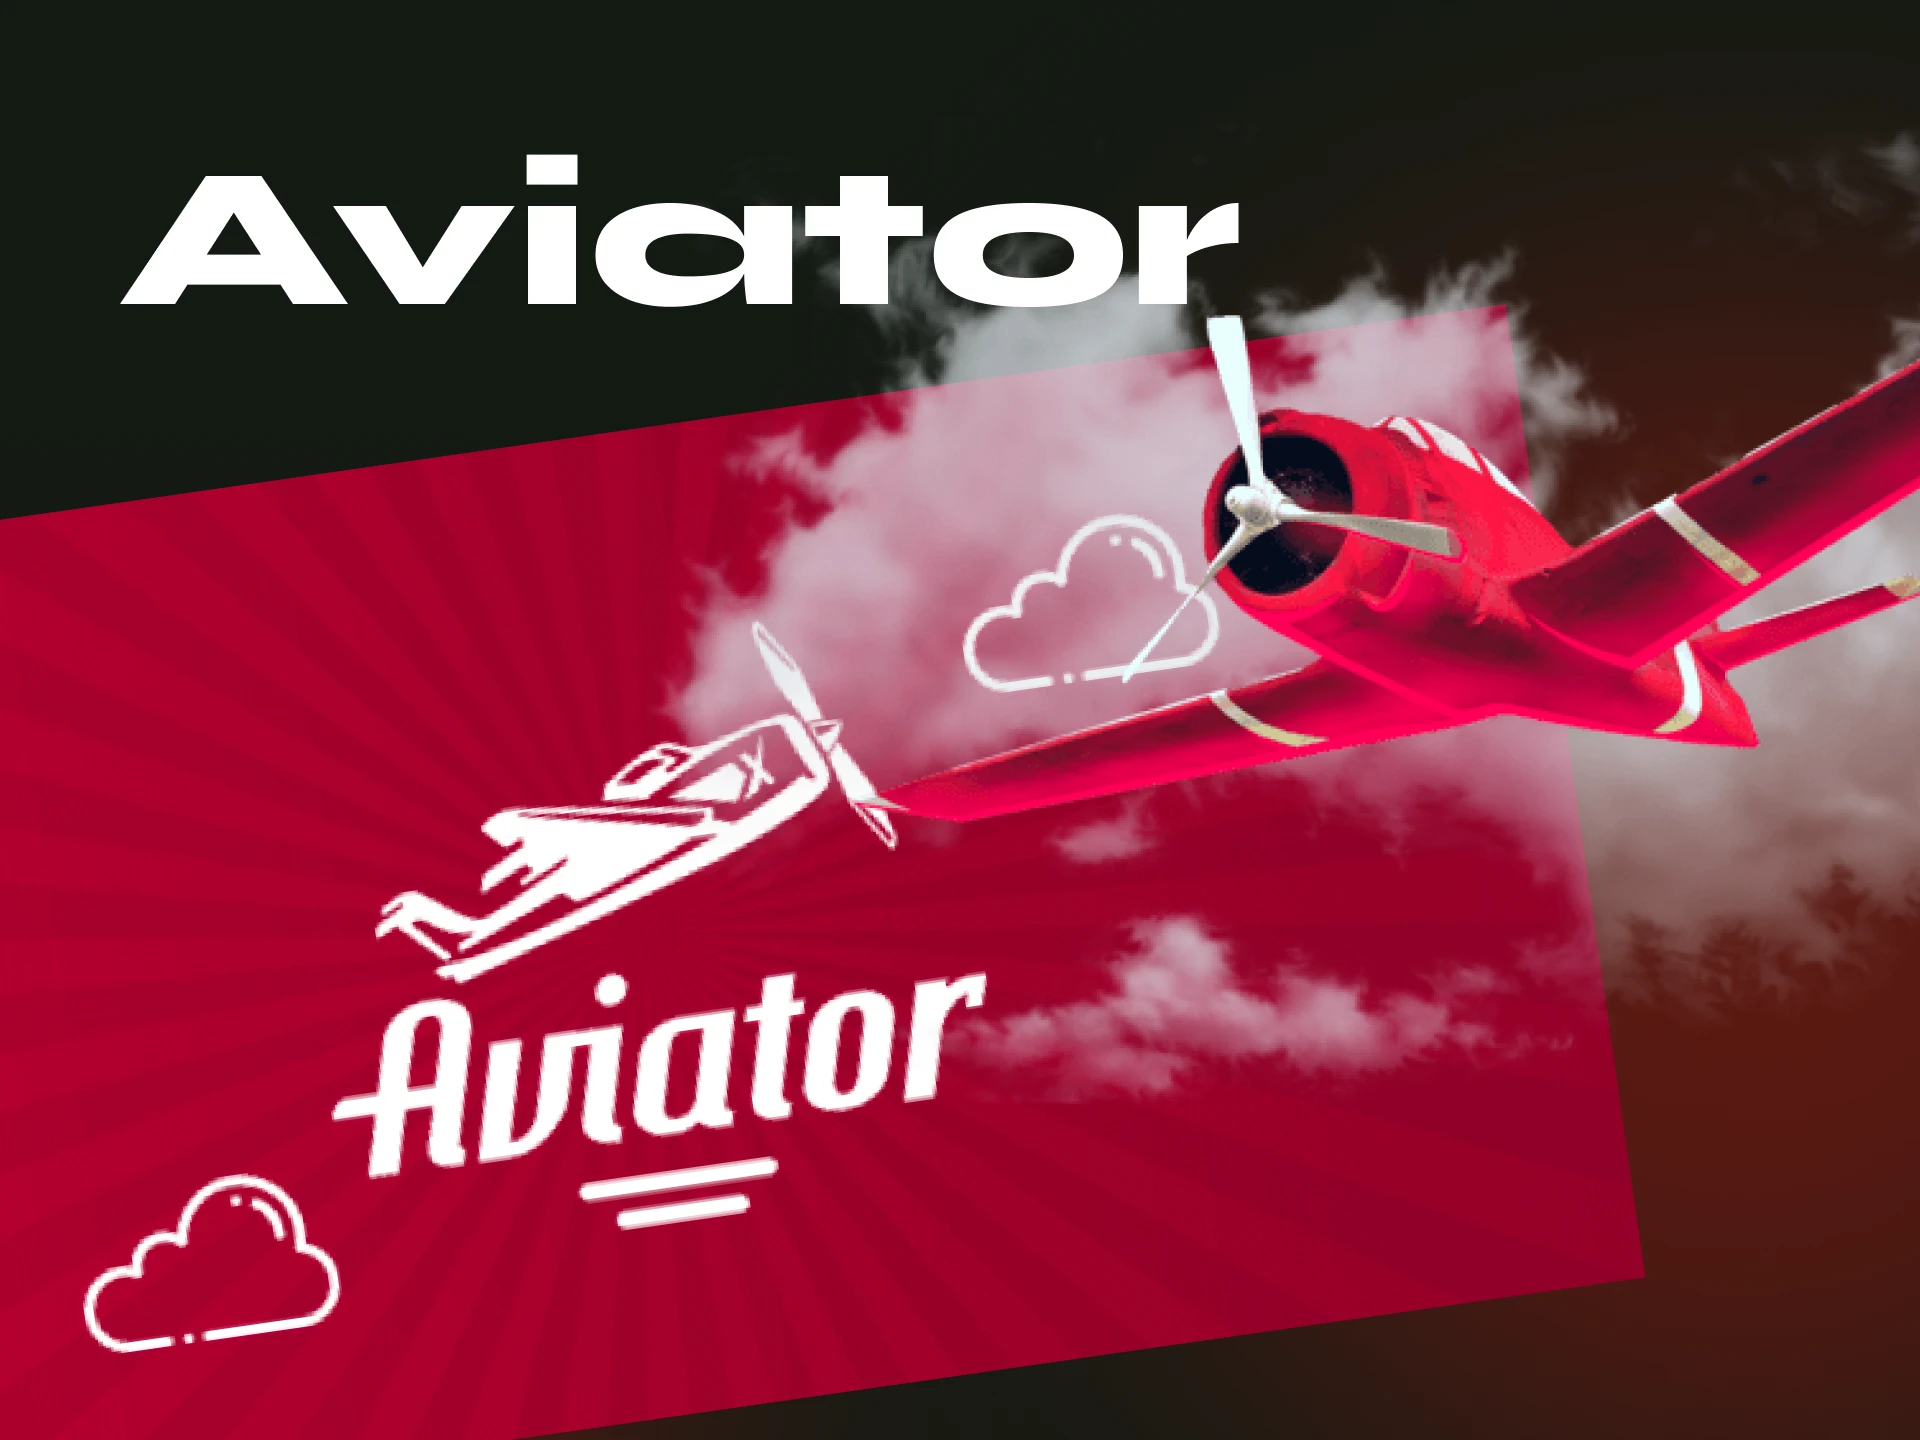 What a player needs to do in the game Aviator.